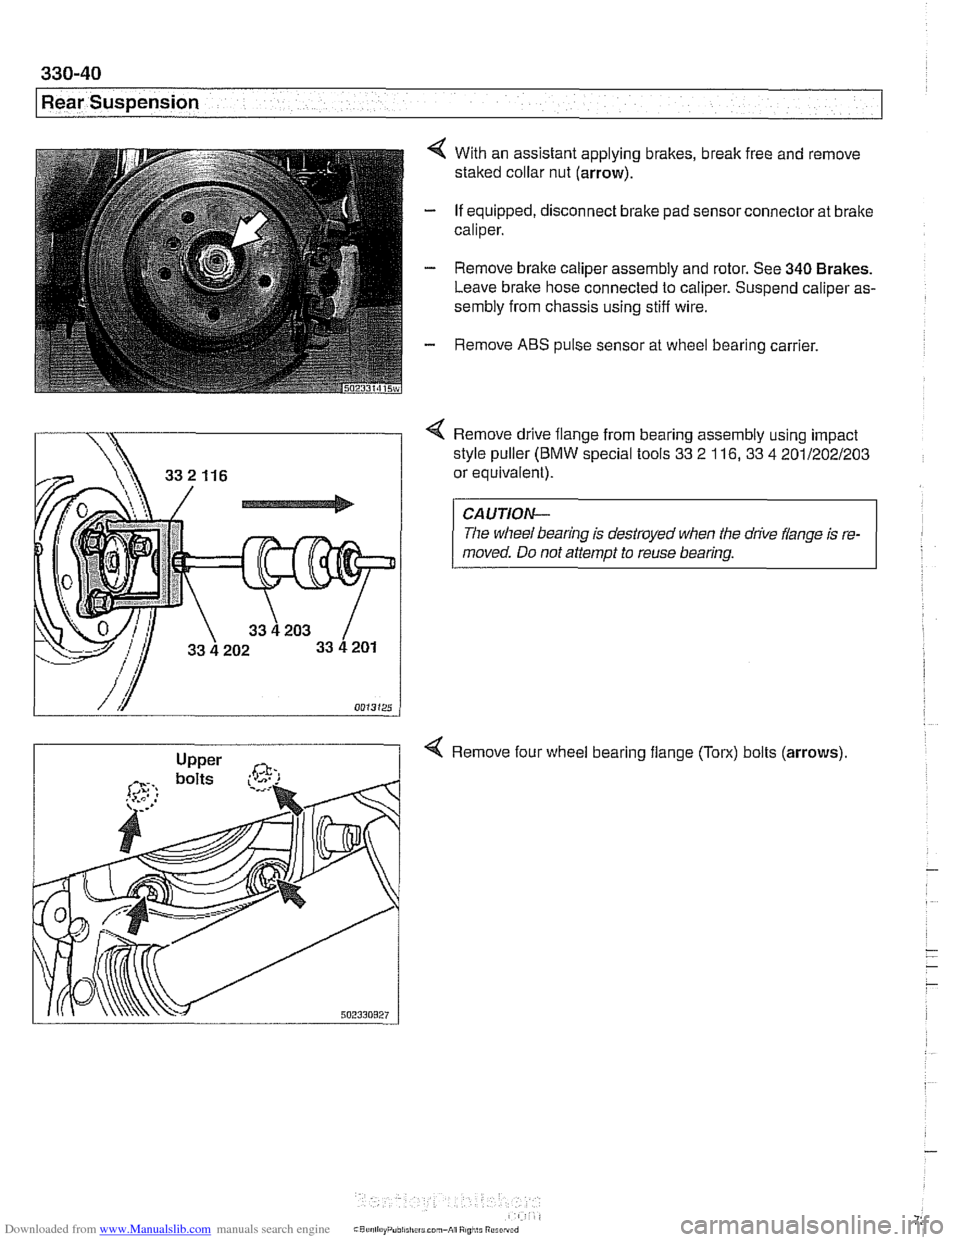 BMW 528i 1998 E39 User Guide Downloaded from www.Manualslib.com manuals search engine 
330-40 
Rear Suspension 
4 With an assistant applying brakes, break free and  remove 
staked  collar nut  (arrow). 
- If equipped,  disconnect